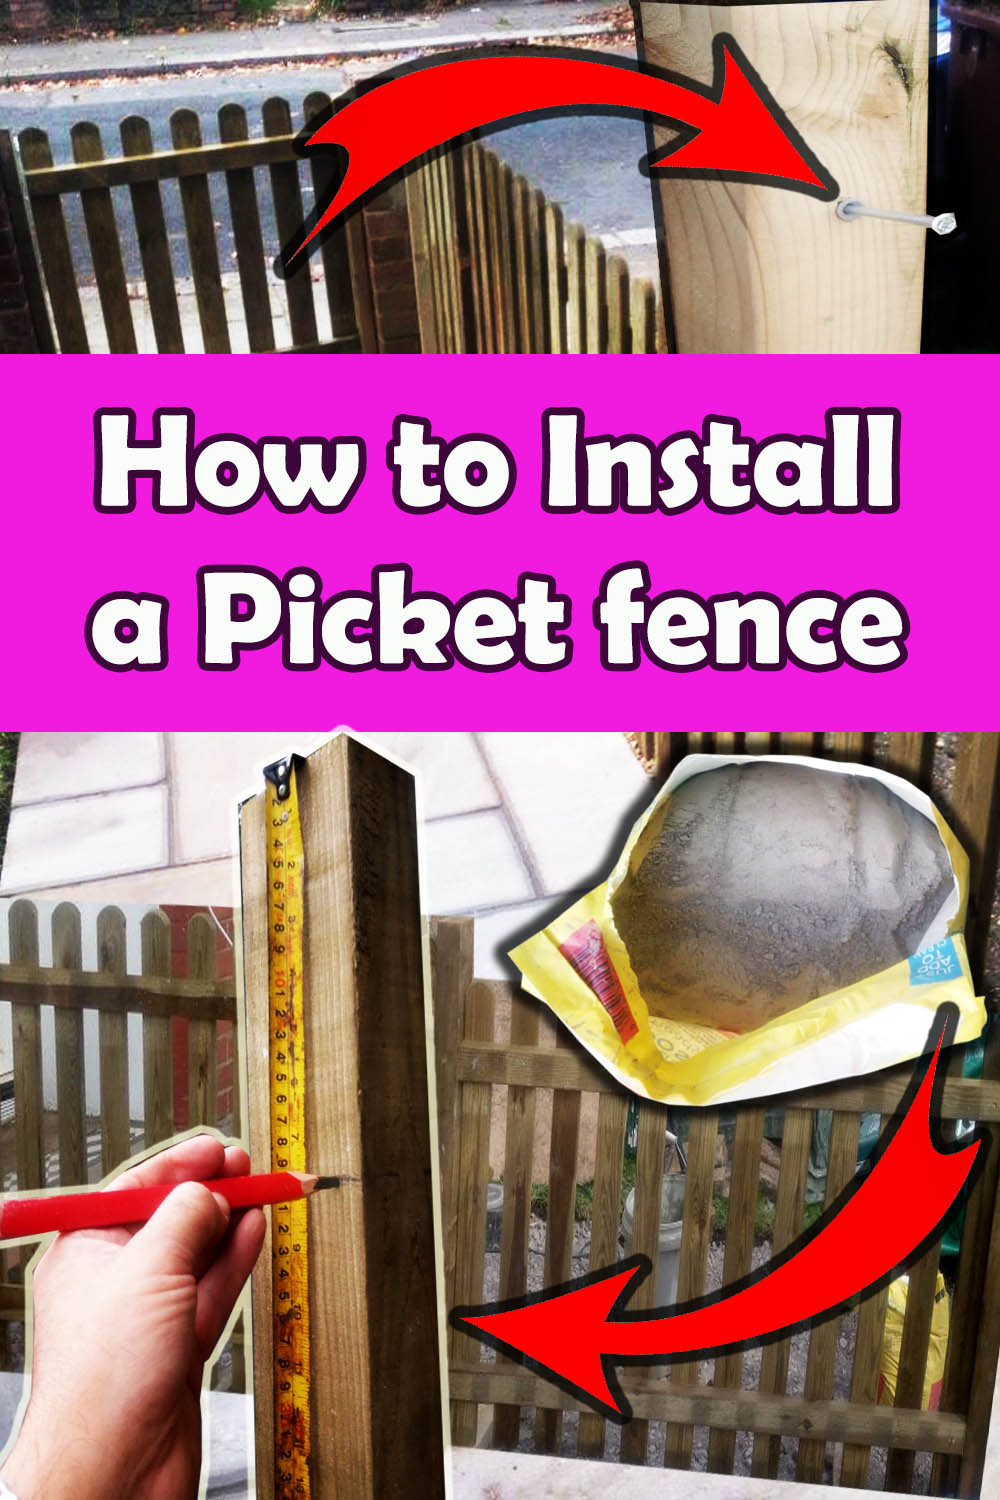 How to install a picket fence